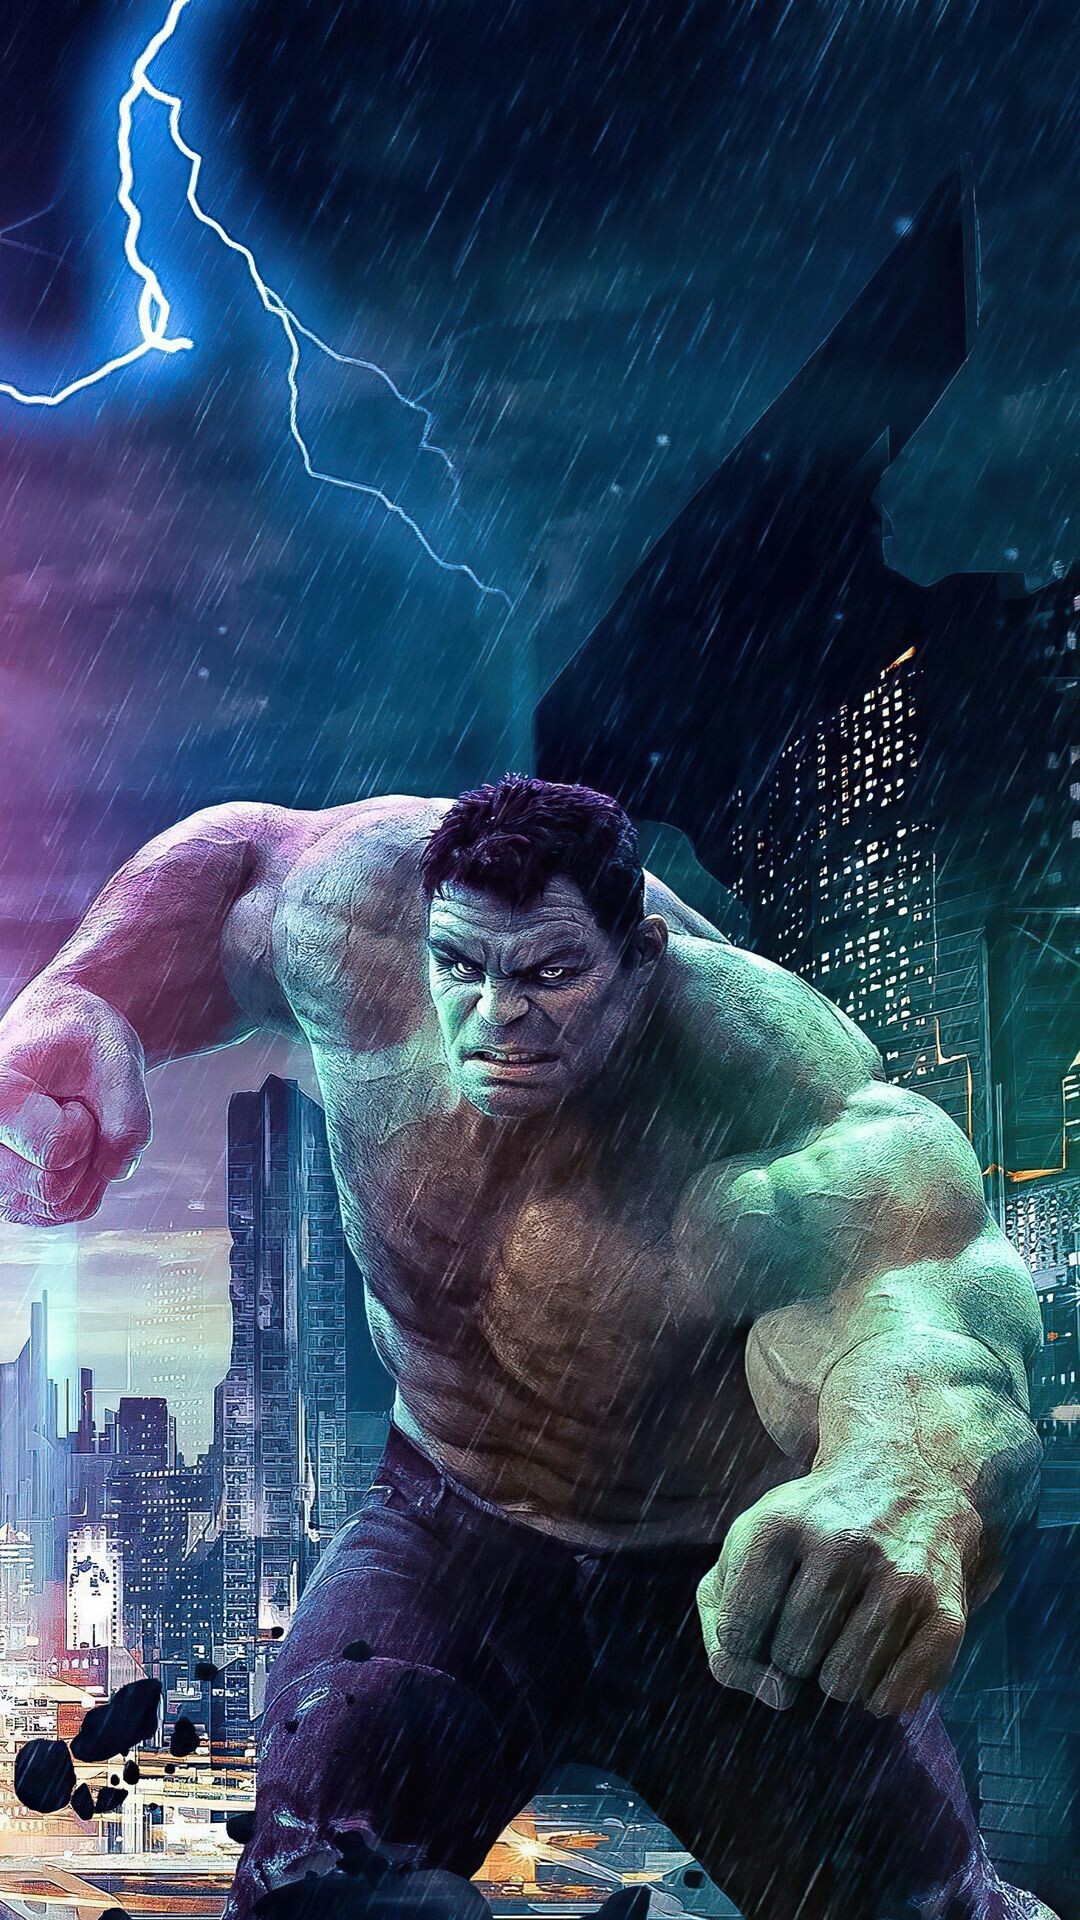 Hulk: A character created by writer Stan Lee and artist Jack Kirby in 1962. 1080x1920 Full HD Wallpaper.